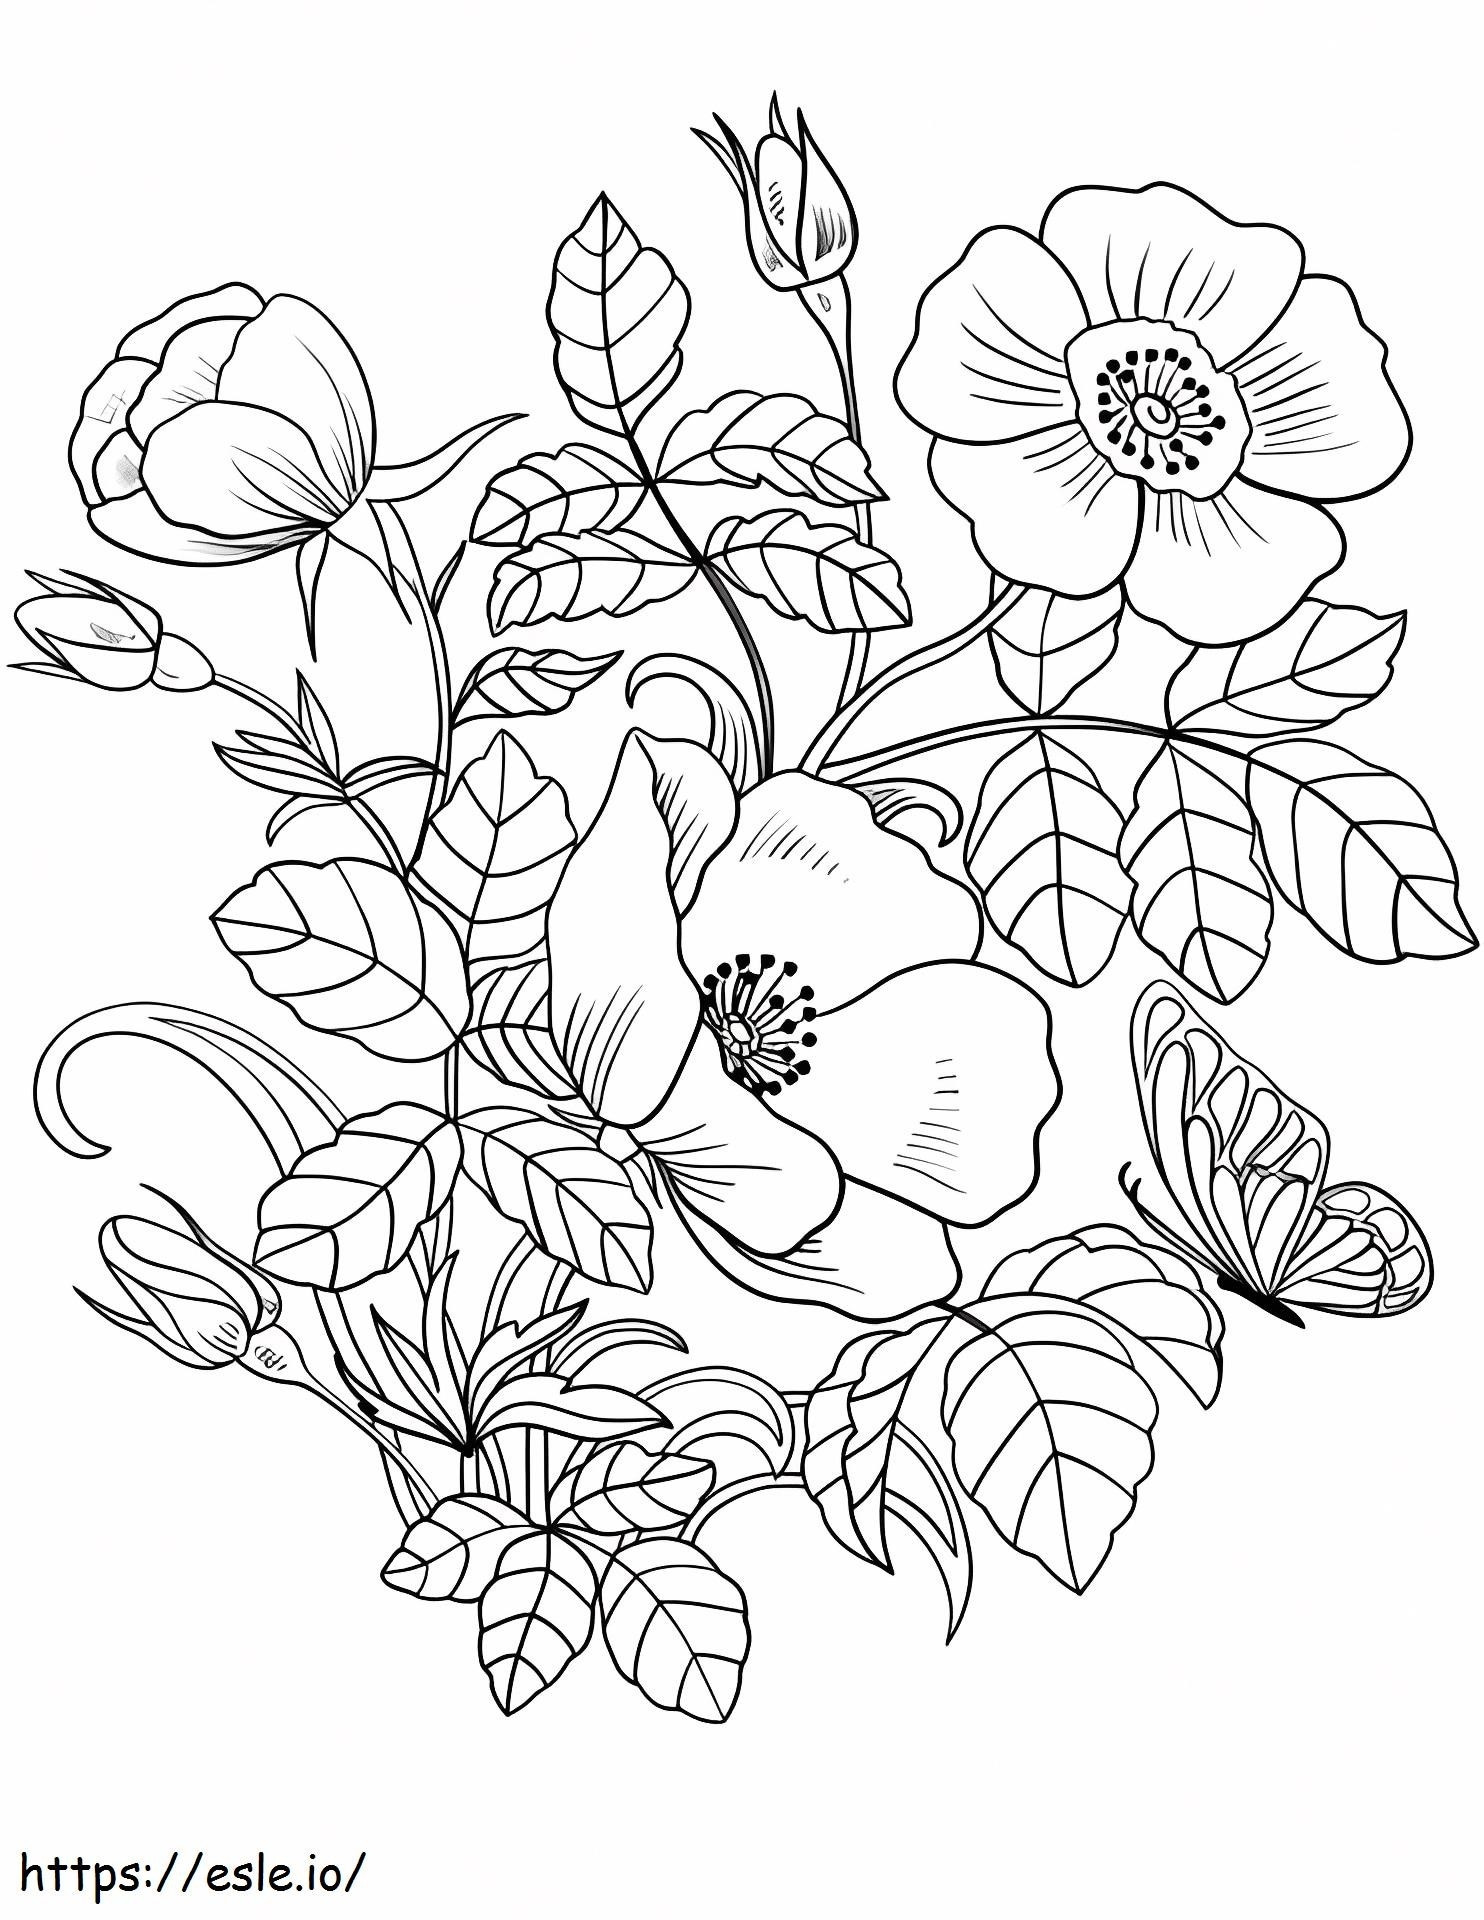 1530149653 Spring Flowers1 coloring page